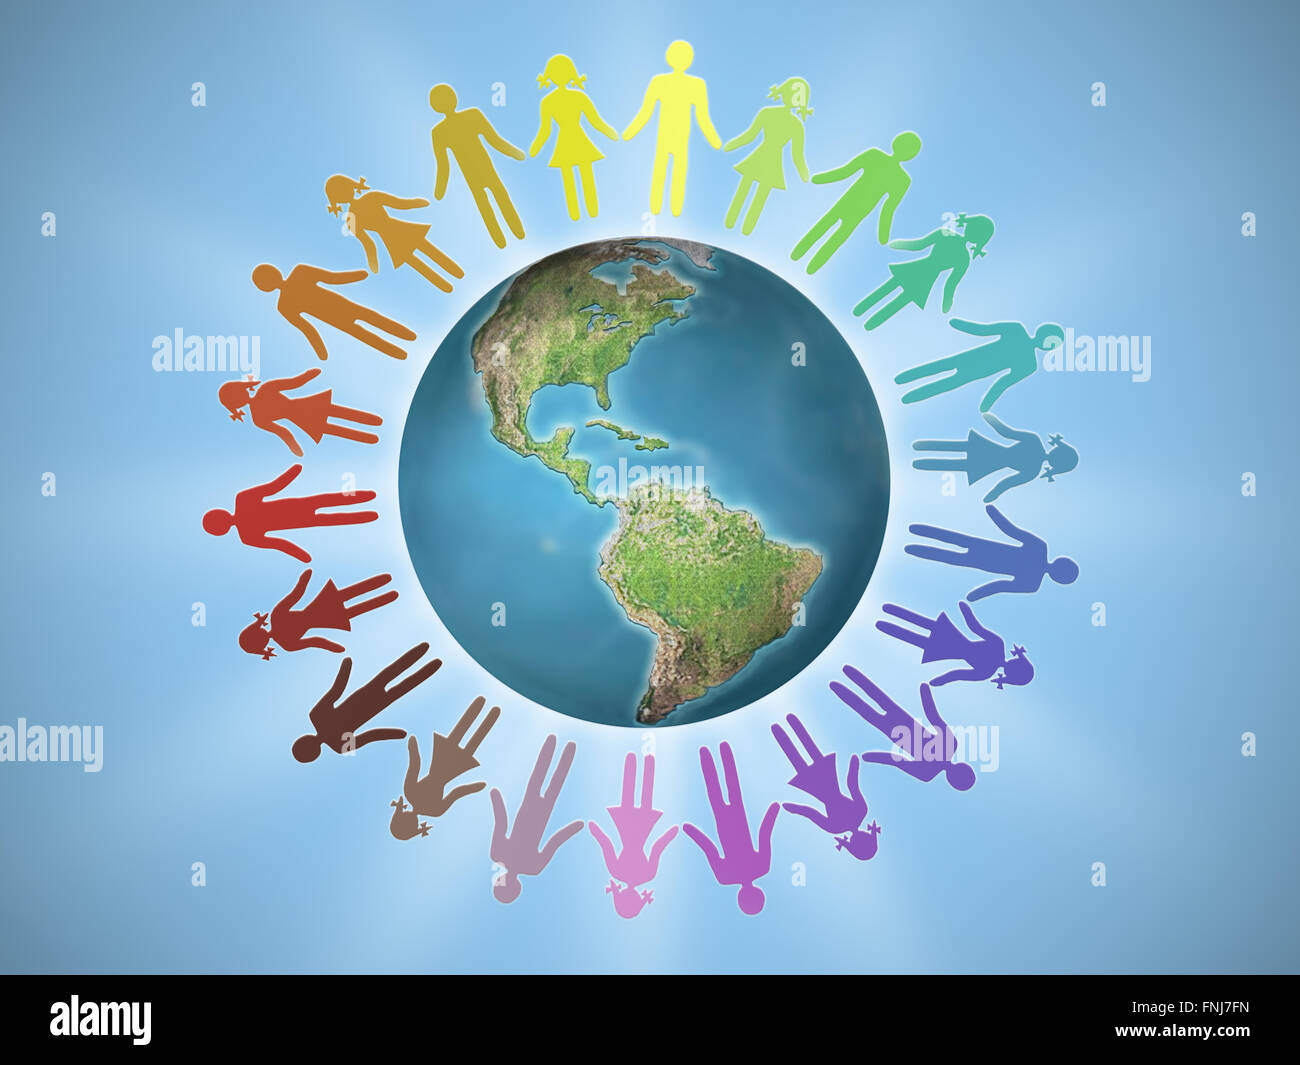 Female and male icons surrounding Earth globe as human unity concept Stock Photo